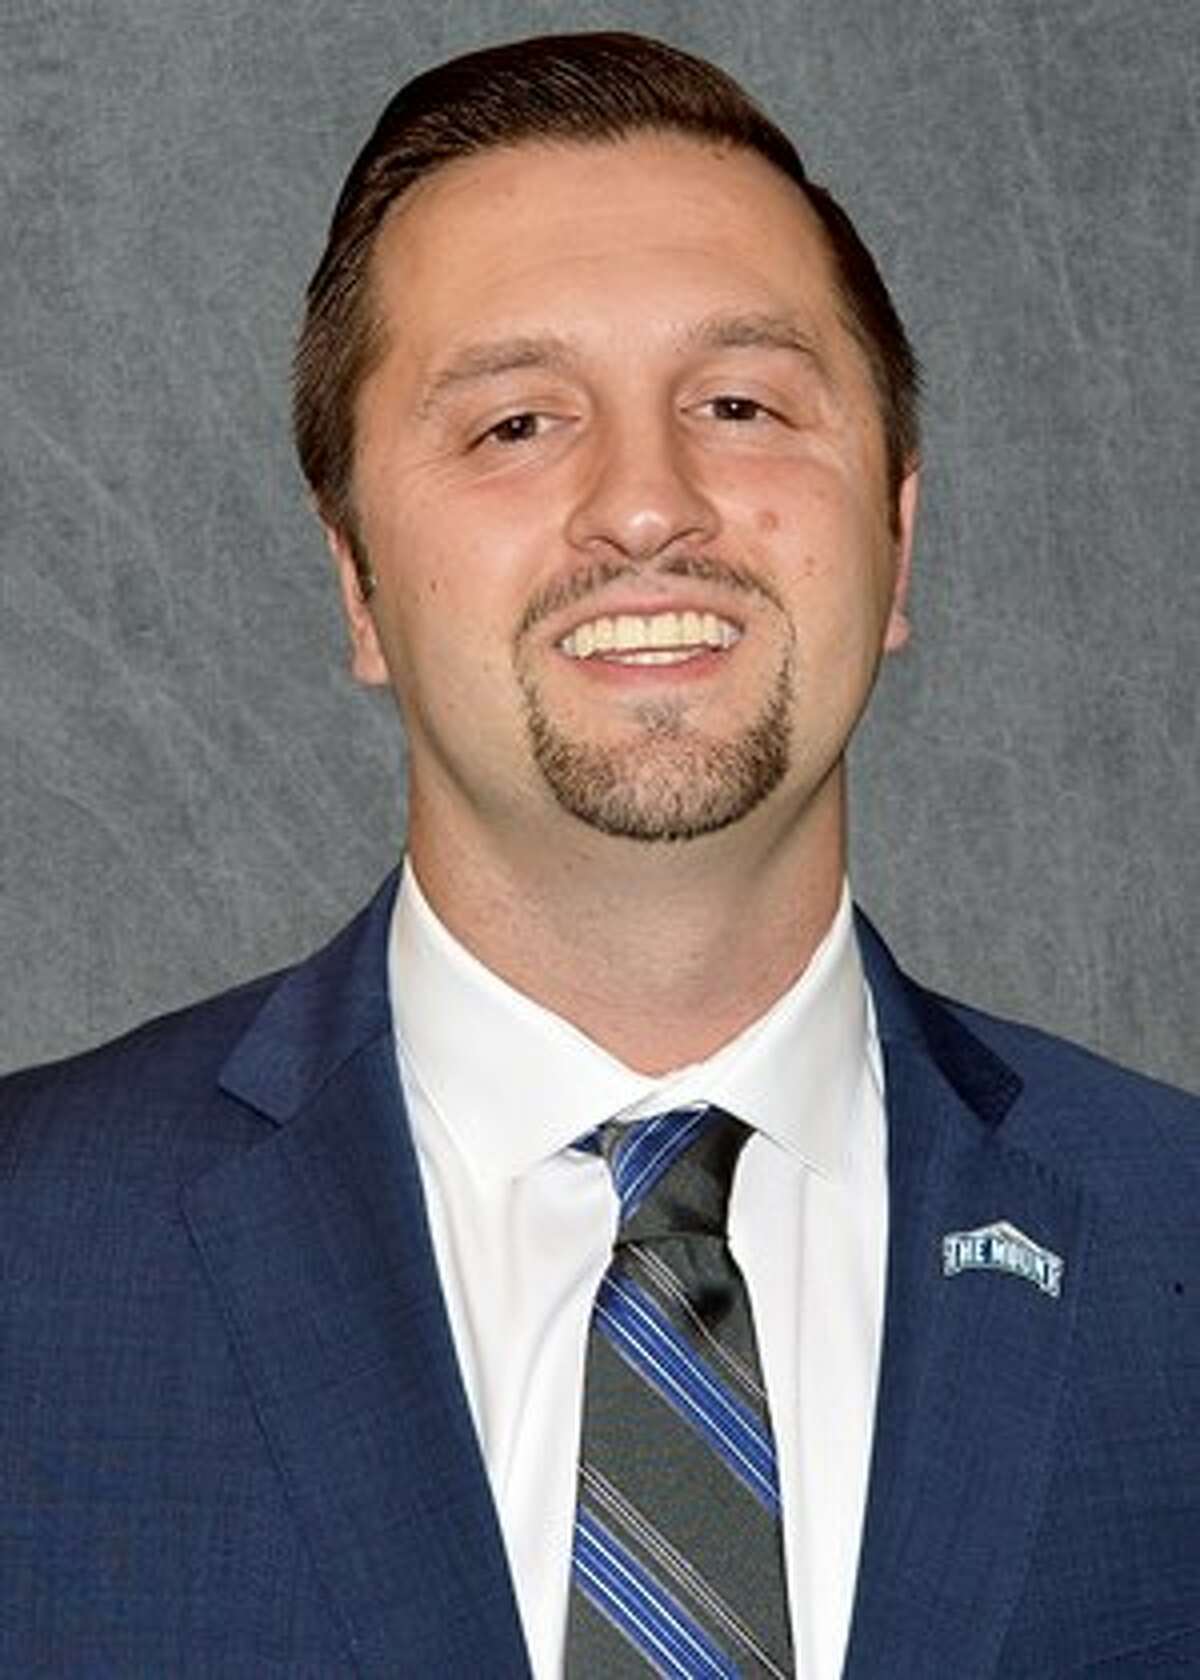 He is in his third season as coach at Mount St. Mary’s, where he replaced former Siena coach Jamion Christian. He had five highly successful seasons as coach at Southern Vermont in Bennington.